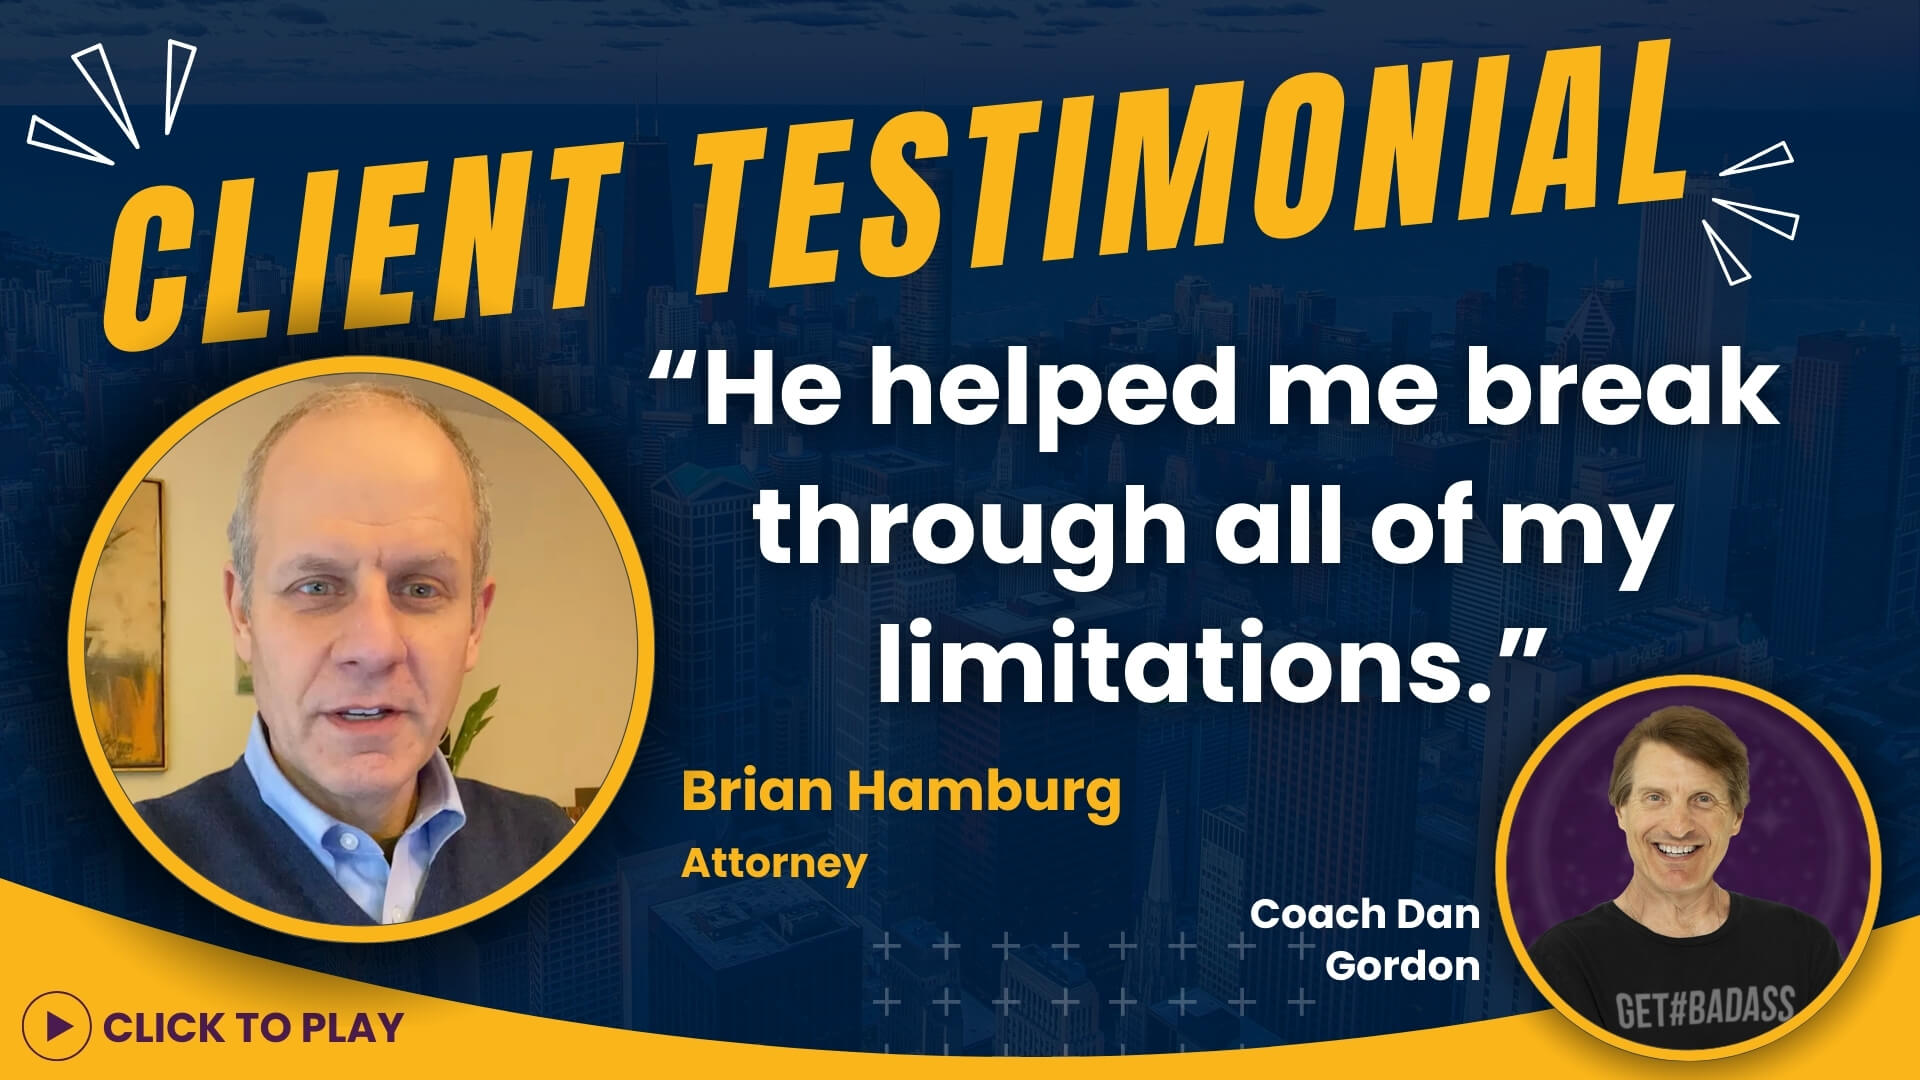 Attorney Brian Hamburg shares a testimonial highlighting how Coach Dan Gordon assisted him in overcoming limitations, including a 'Click to Play' video link.